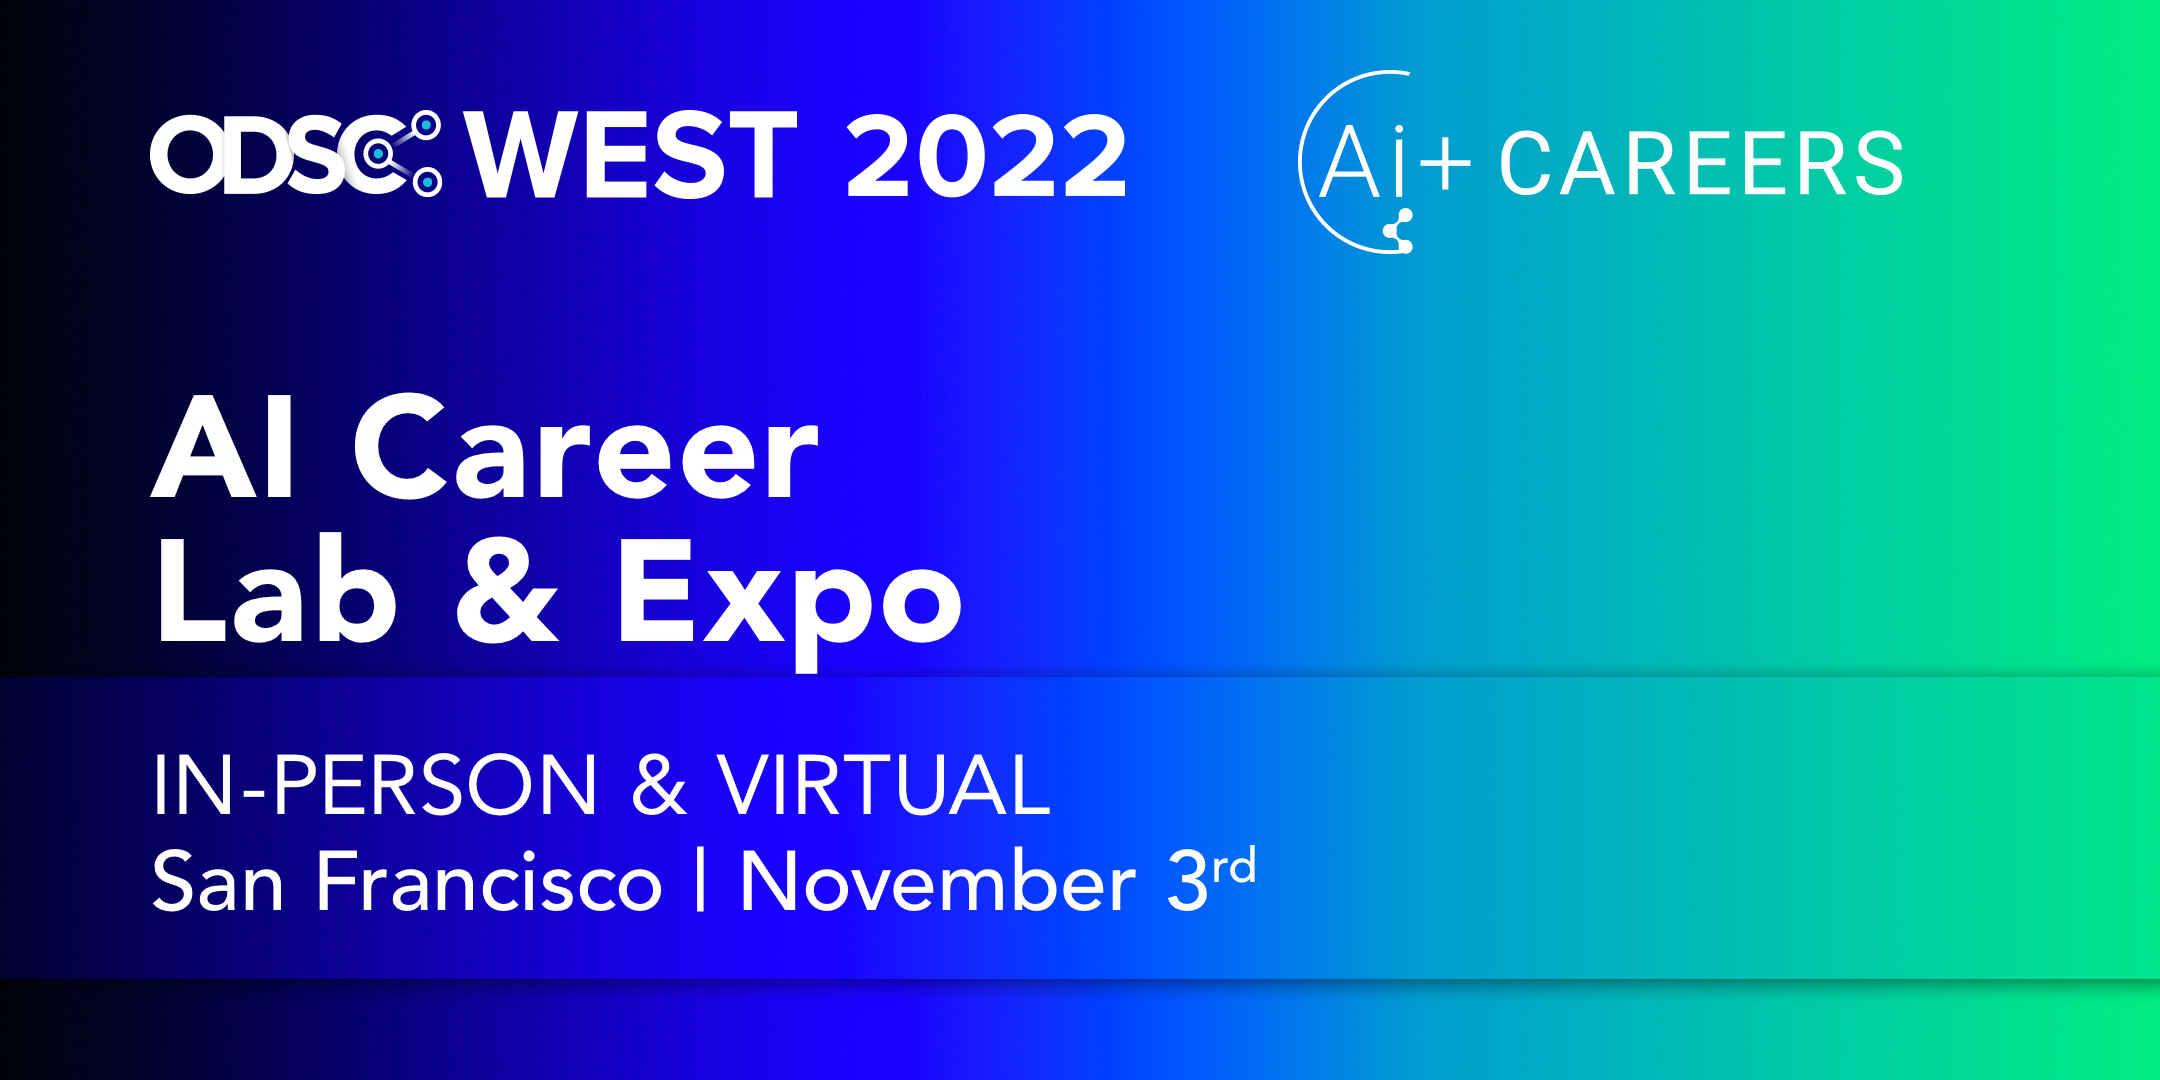 Ai + Career Lab & Expo at ODSC West 2022, Online Event